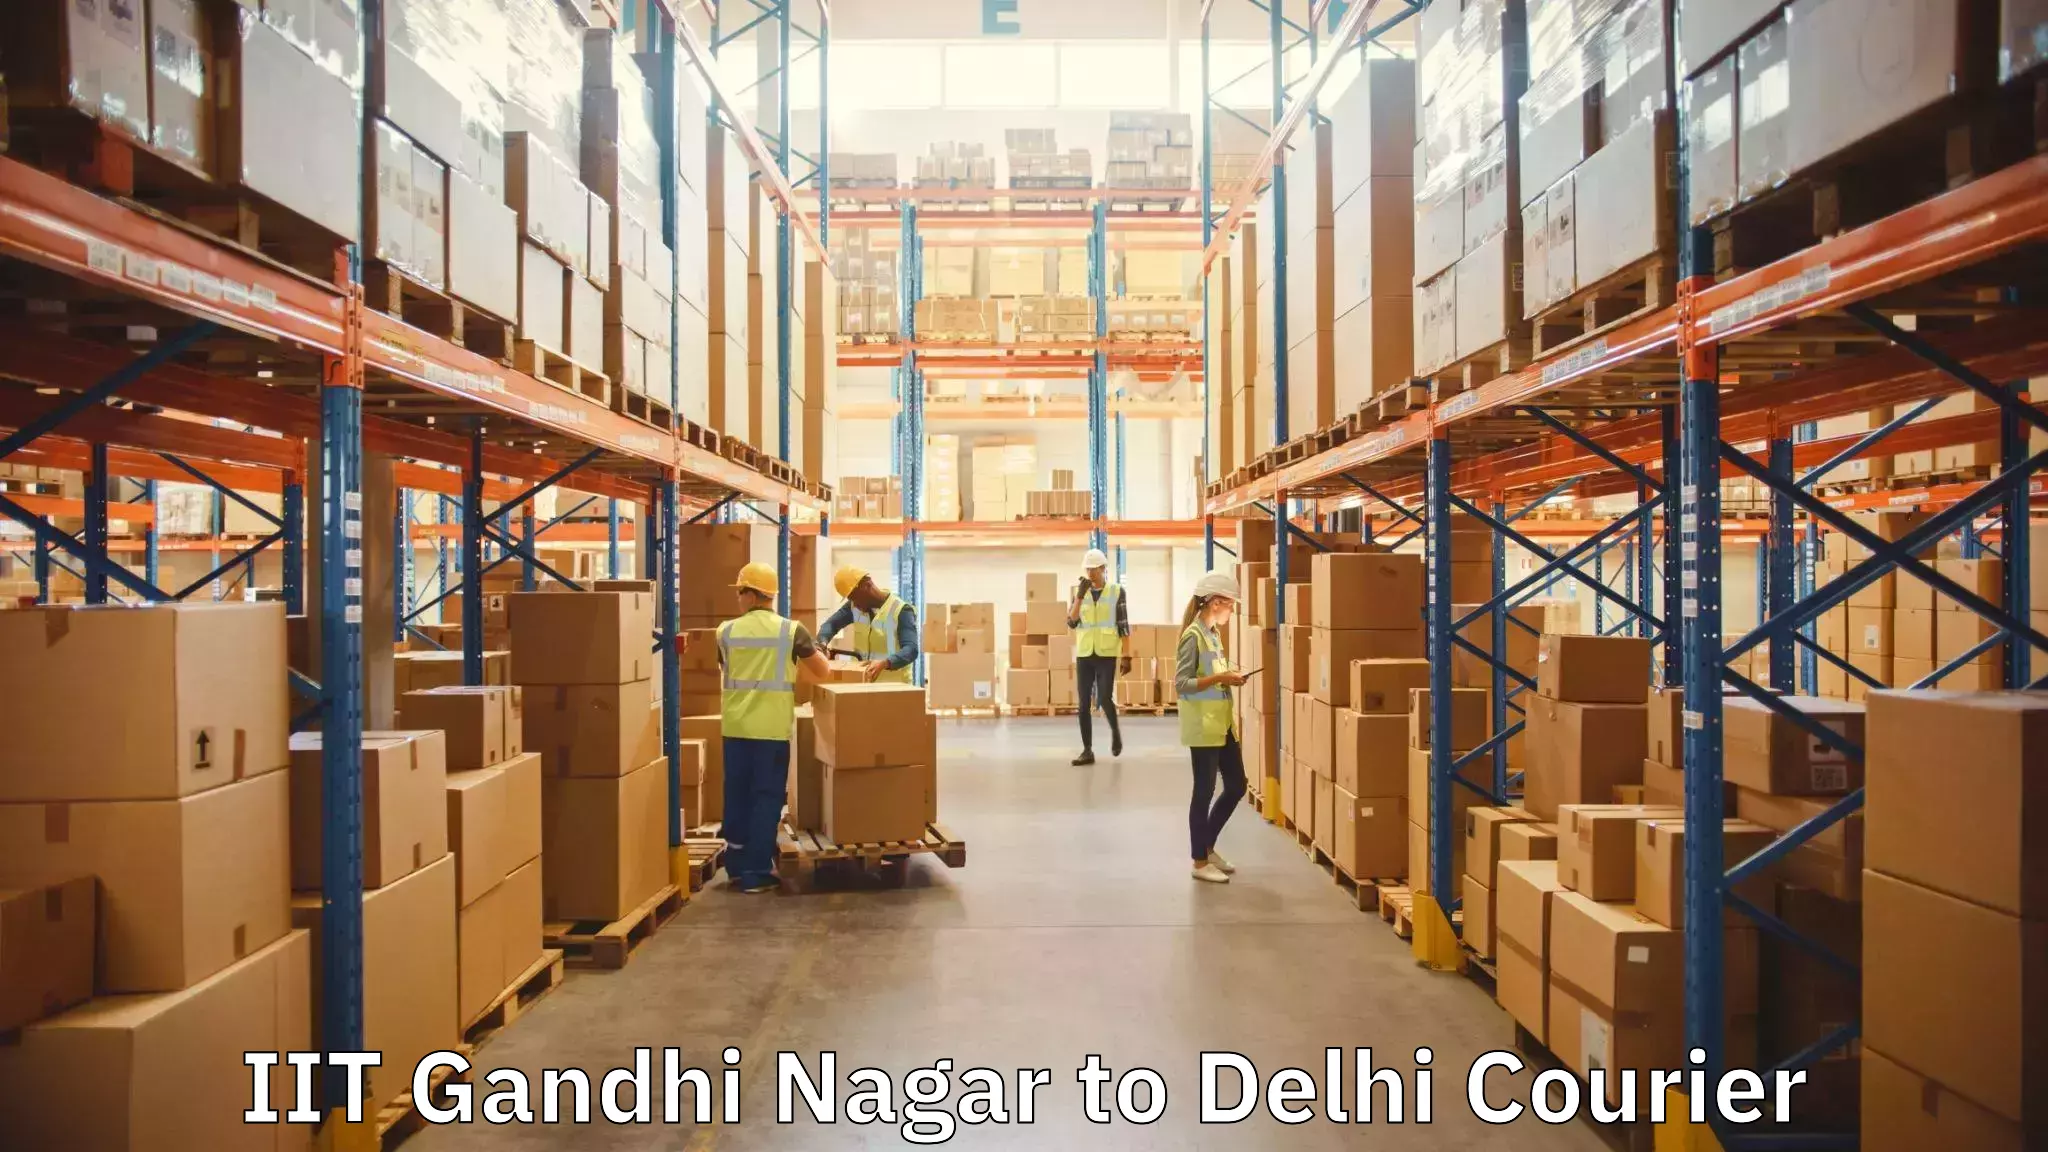 High-quality moving services IIT Gandhi Nagar to Lodhi Road